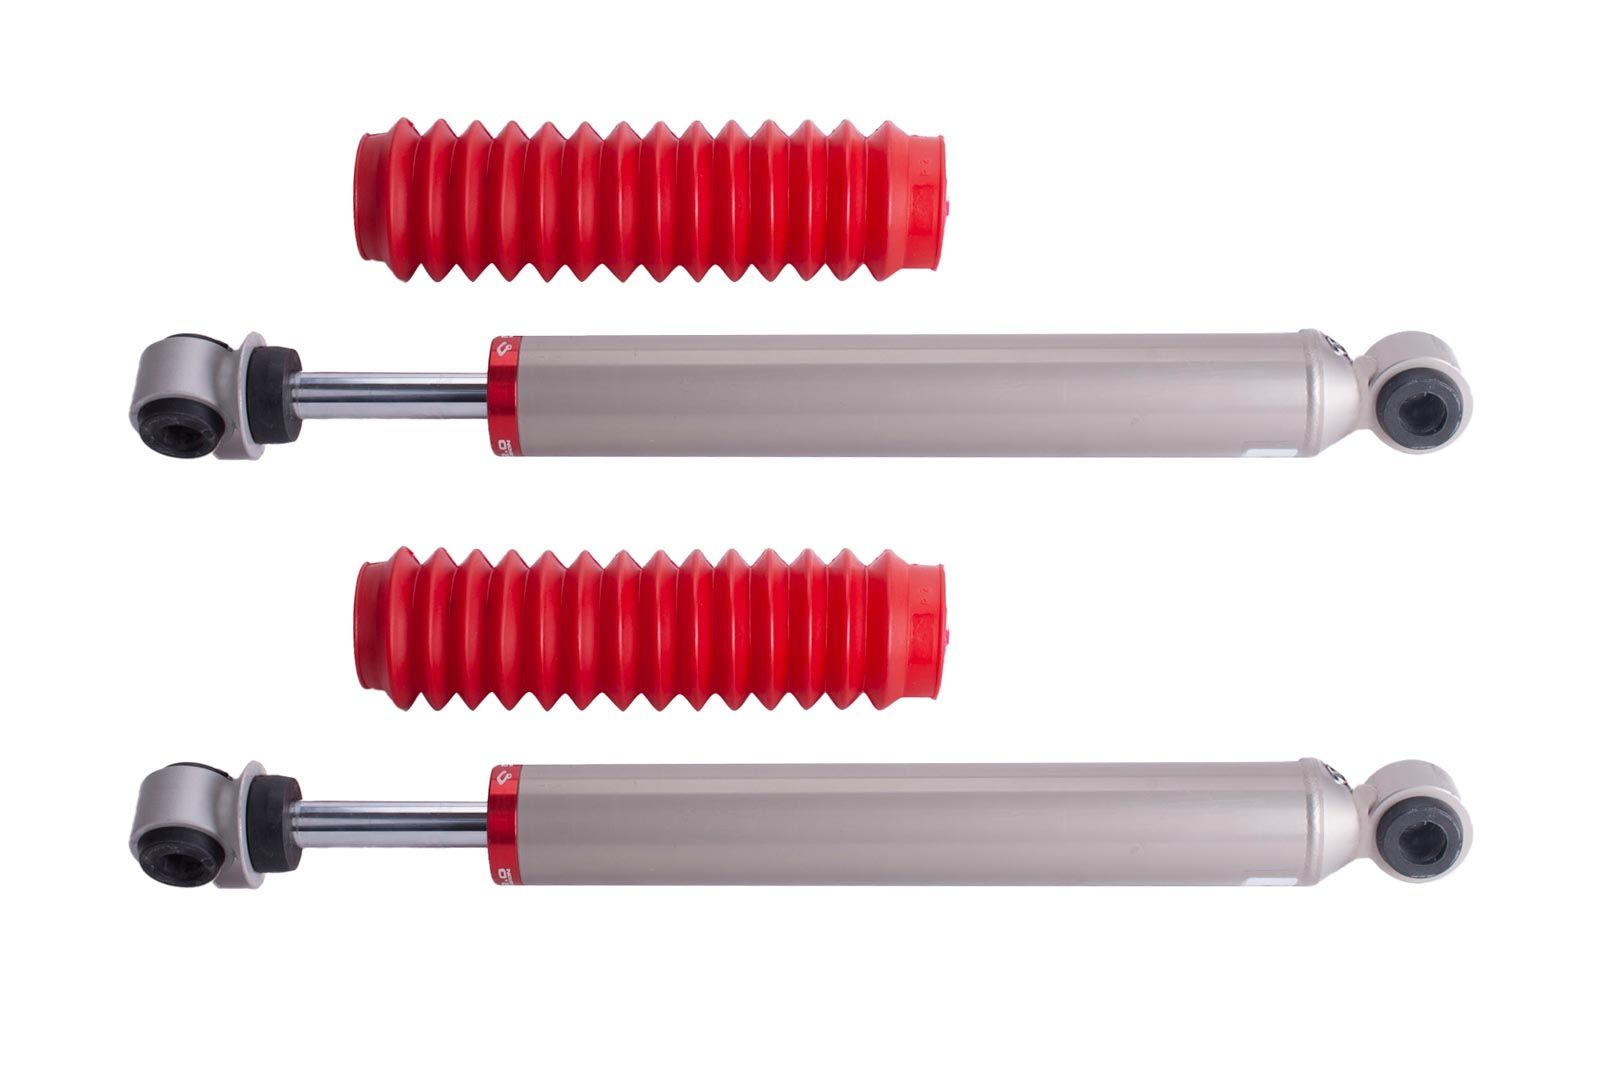 Carbon Offroad rear Shock absorbers to suit Toyota Hilux N80 Revo (pair)